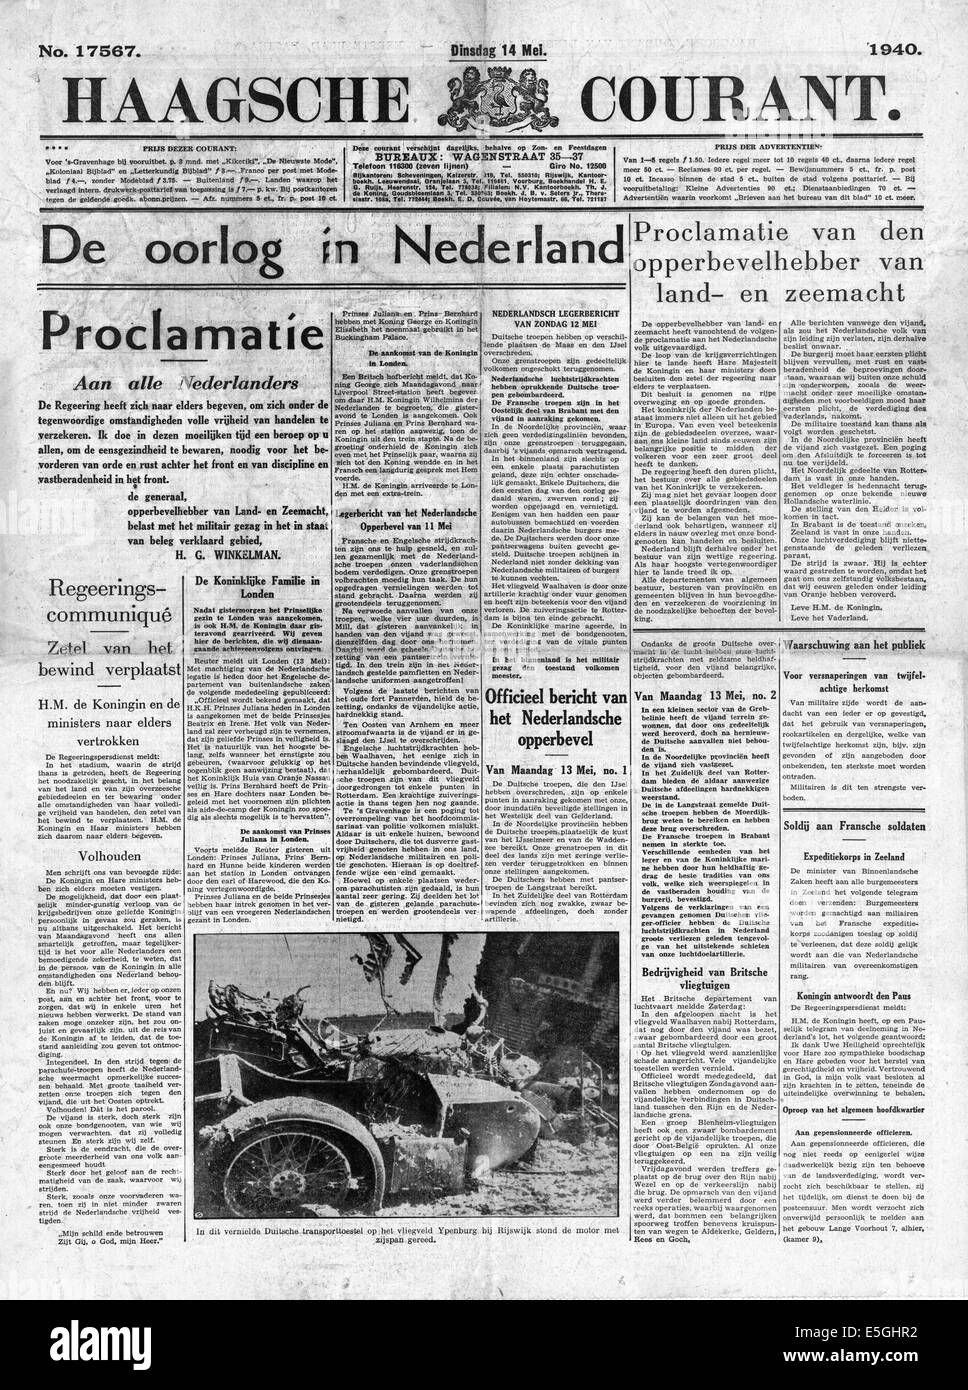 1940 Haagsche Courant (Netherlands) front page reporting Germany at war with Holland Stock Photo